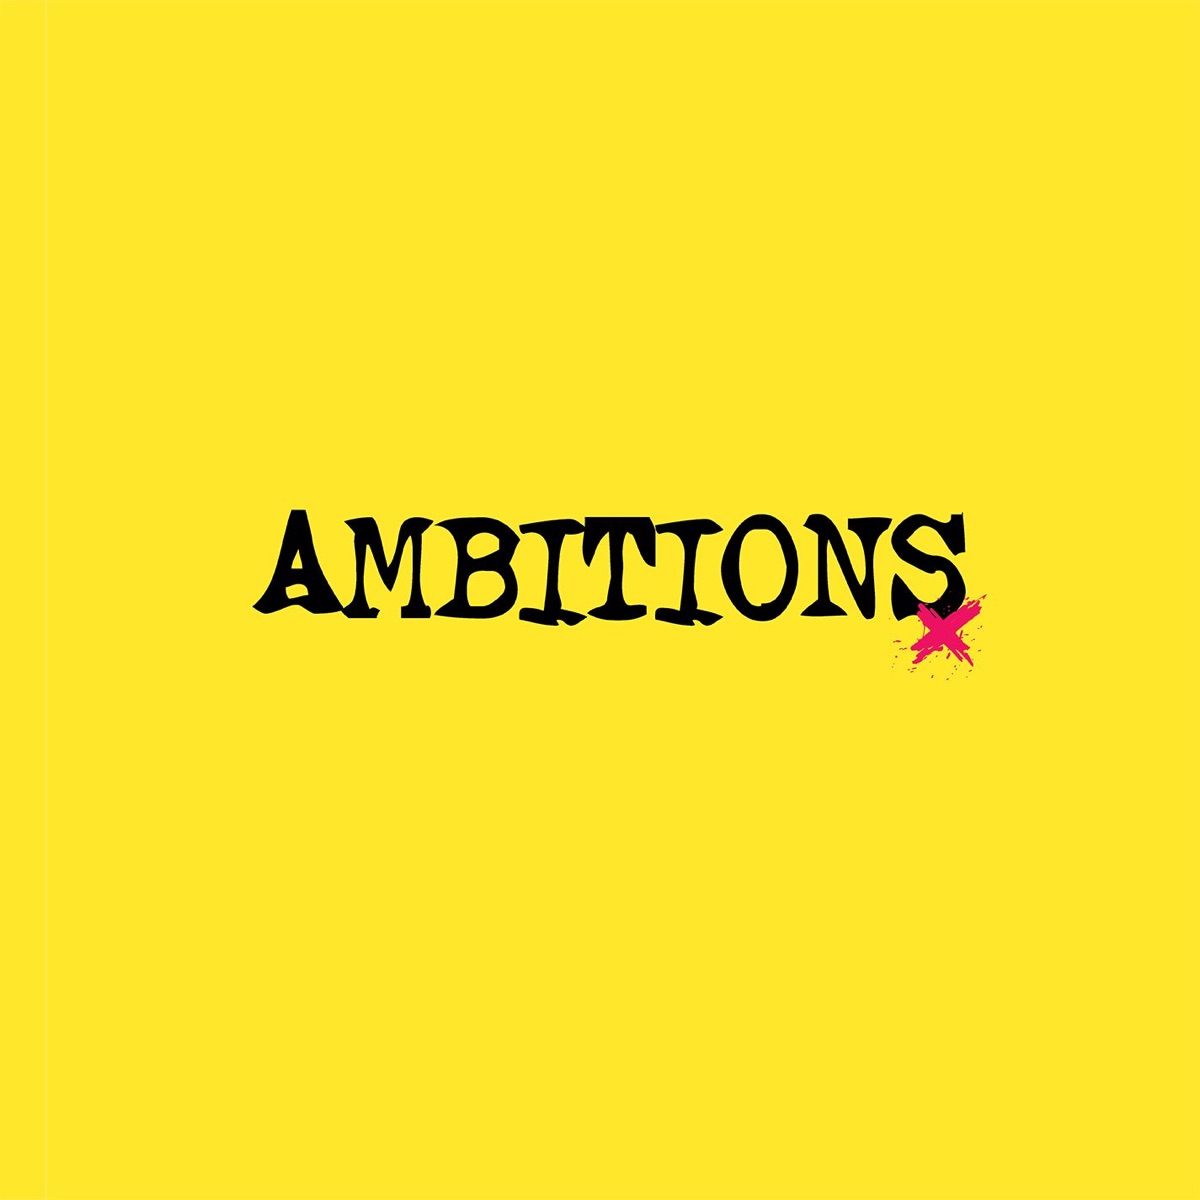 Cover for『ONE OK ROCK - Taking Off (English ver.)』from the release『Ambitions』